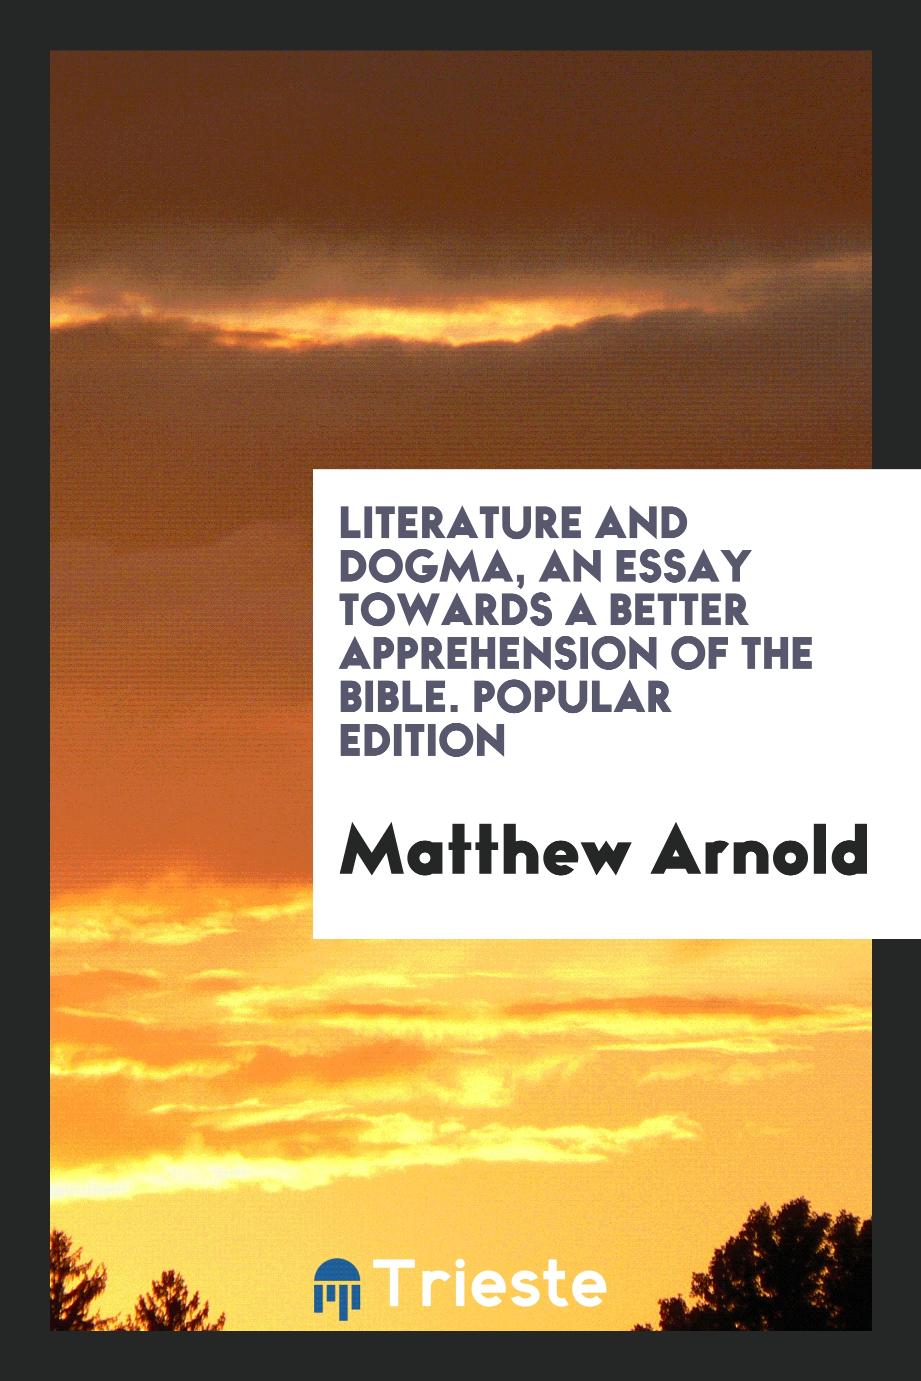 Literature and Dogma, an Essay Towards a Better Apprehension of the Bible. Popular Edition